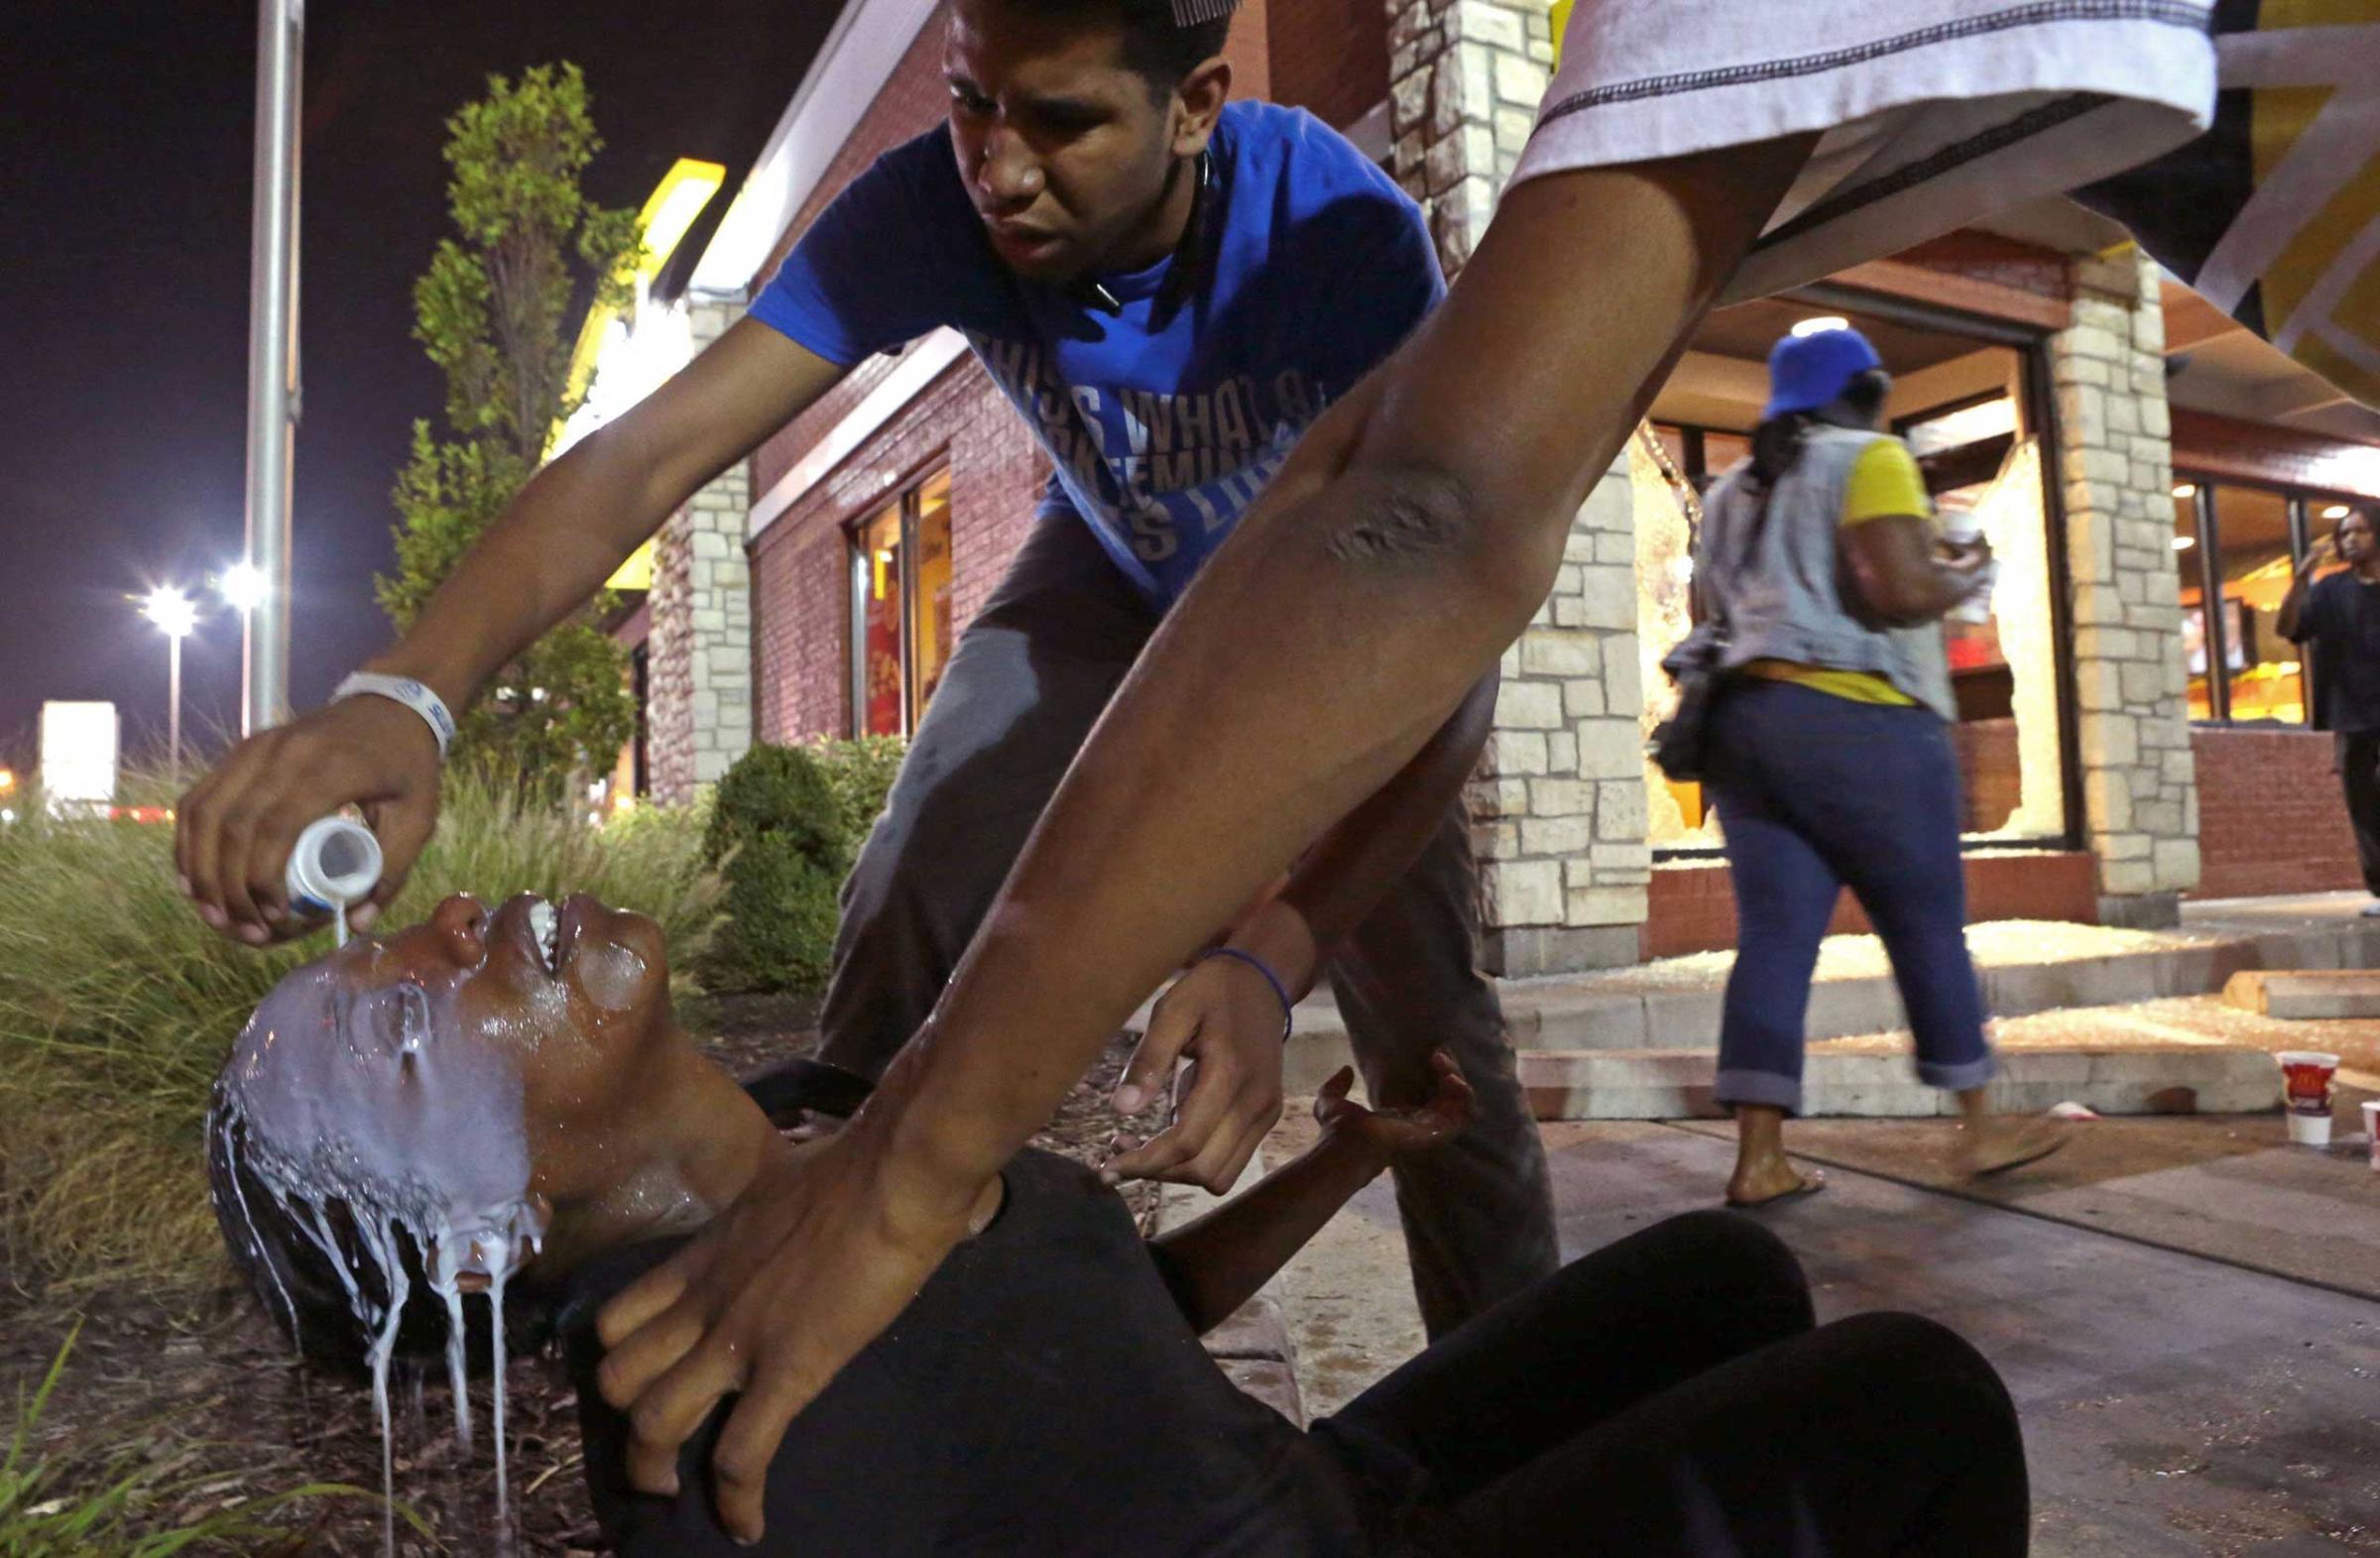 Aug. 17, 2014. Protesters help Cassandra Roberts, who was hit by tear gas on Sunday in Ferguson, Mo. They had broken into the McDonald's to get milk to wash the gas out of her eyes. "We thought it could be a peaceful night," said Roberts, who was marching in Ferguson for the first time. "What the hell is going on in this world?"